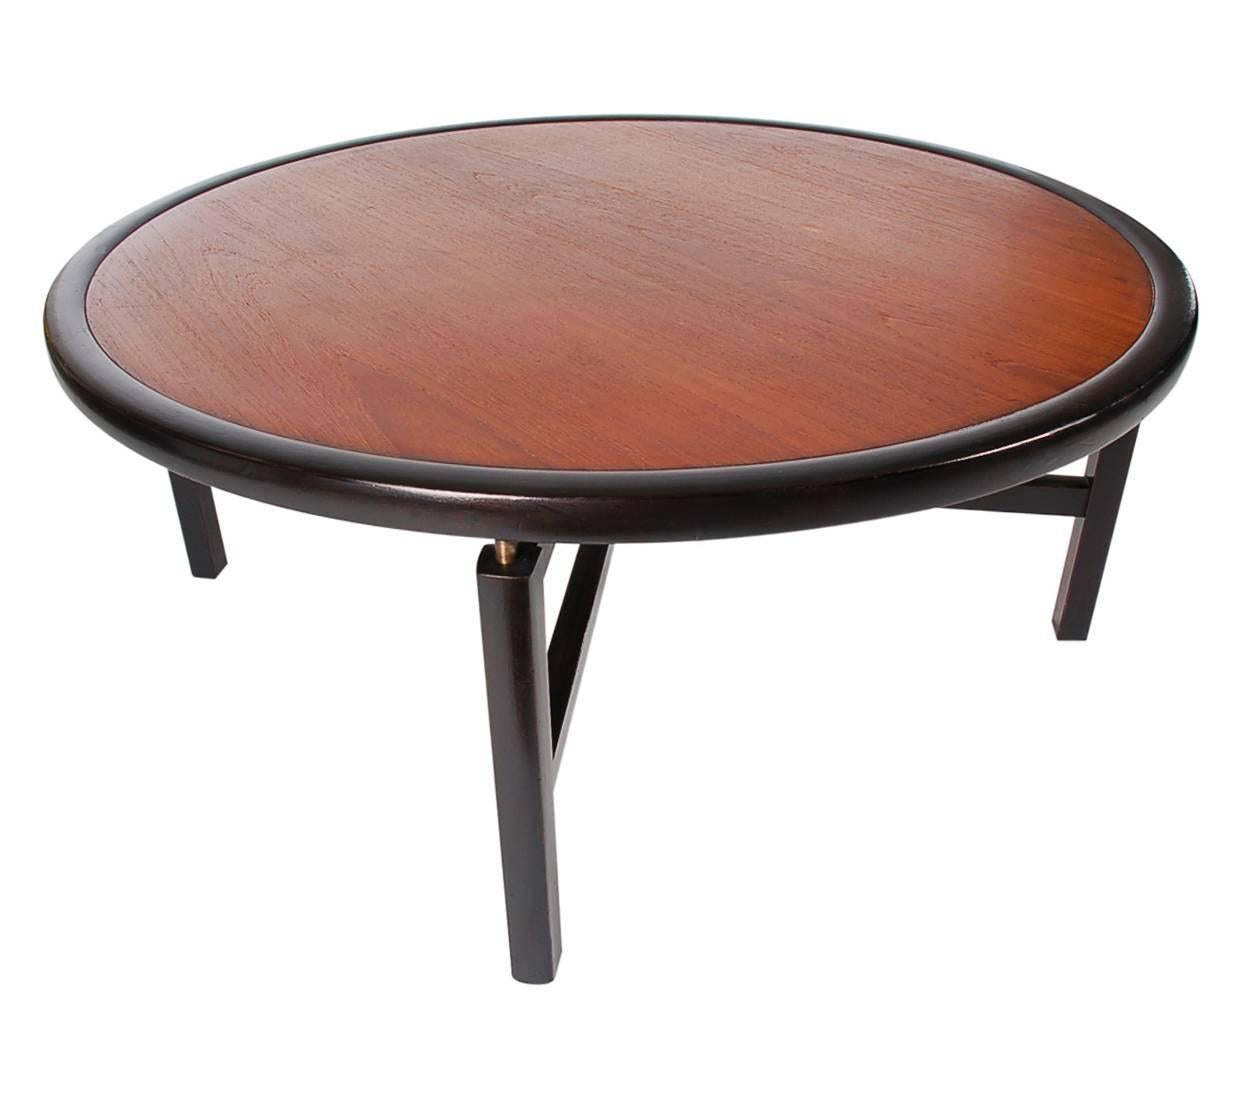 American Midcentury Danish Modern Teak Circular Cocktail by Michael Taylor for Baker For Sale